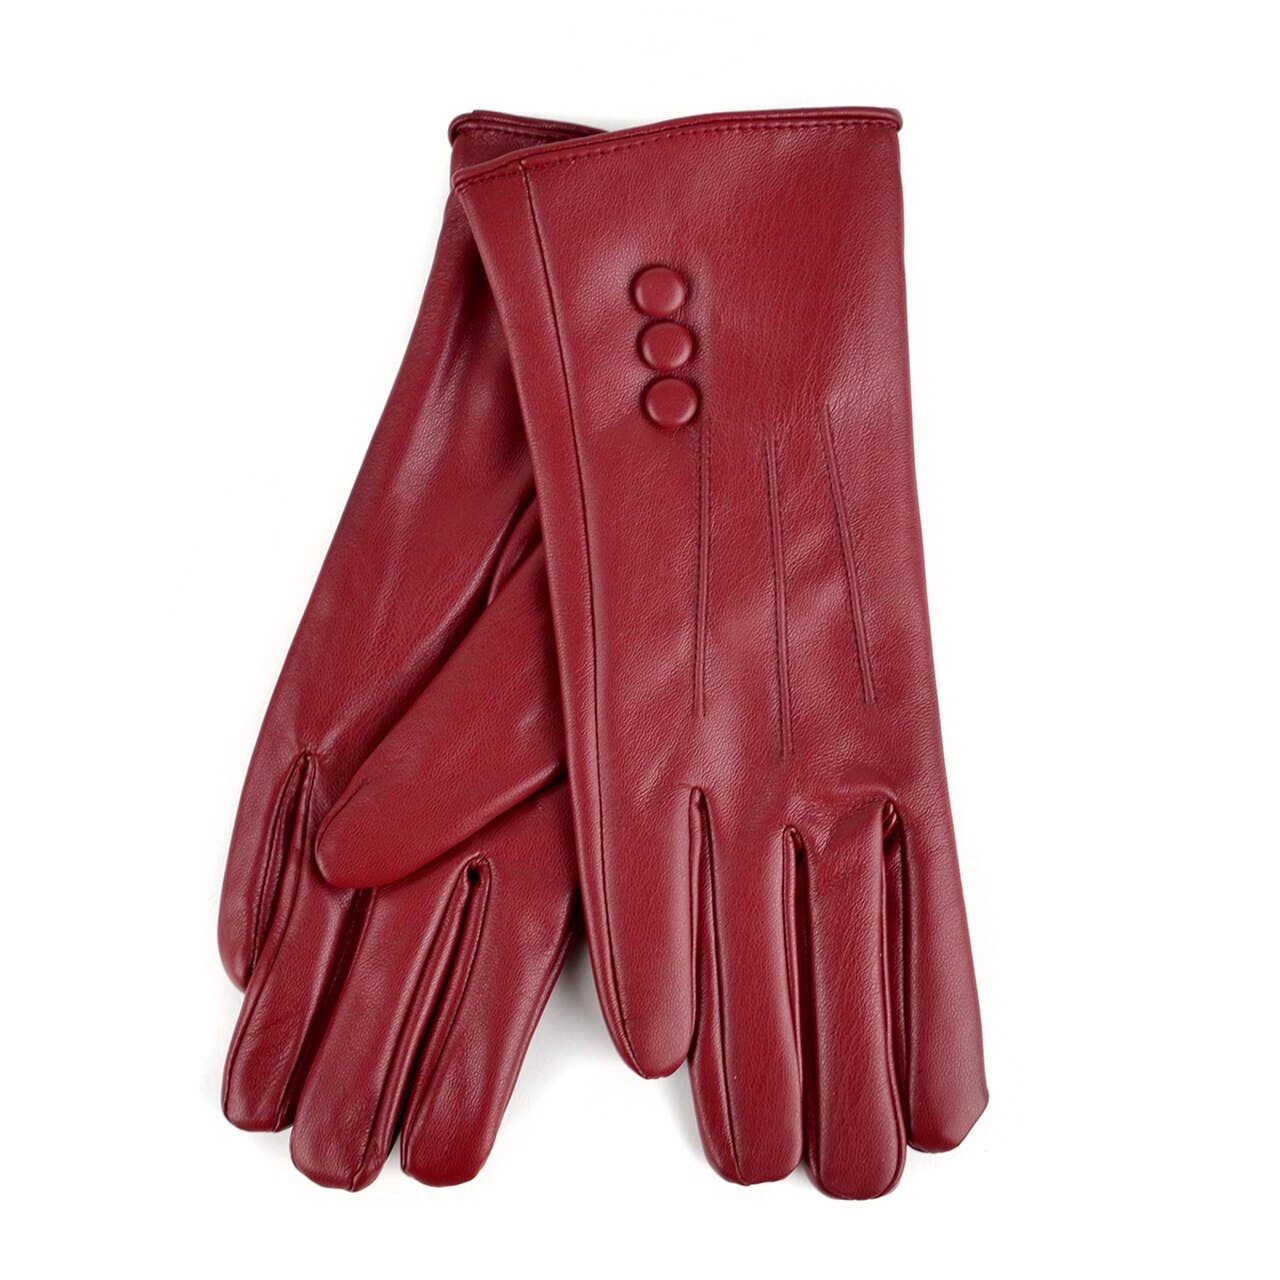 Women's PU Leather Winter Touch Screen Gloves: Brown / S/M